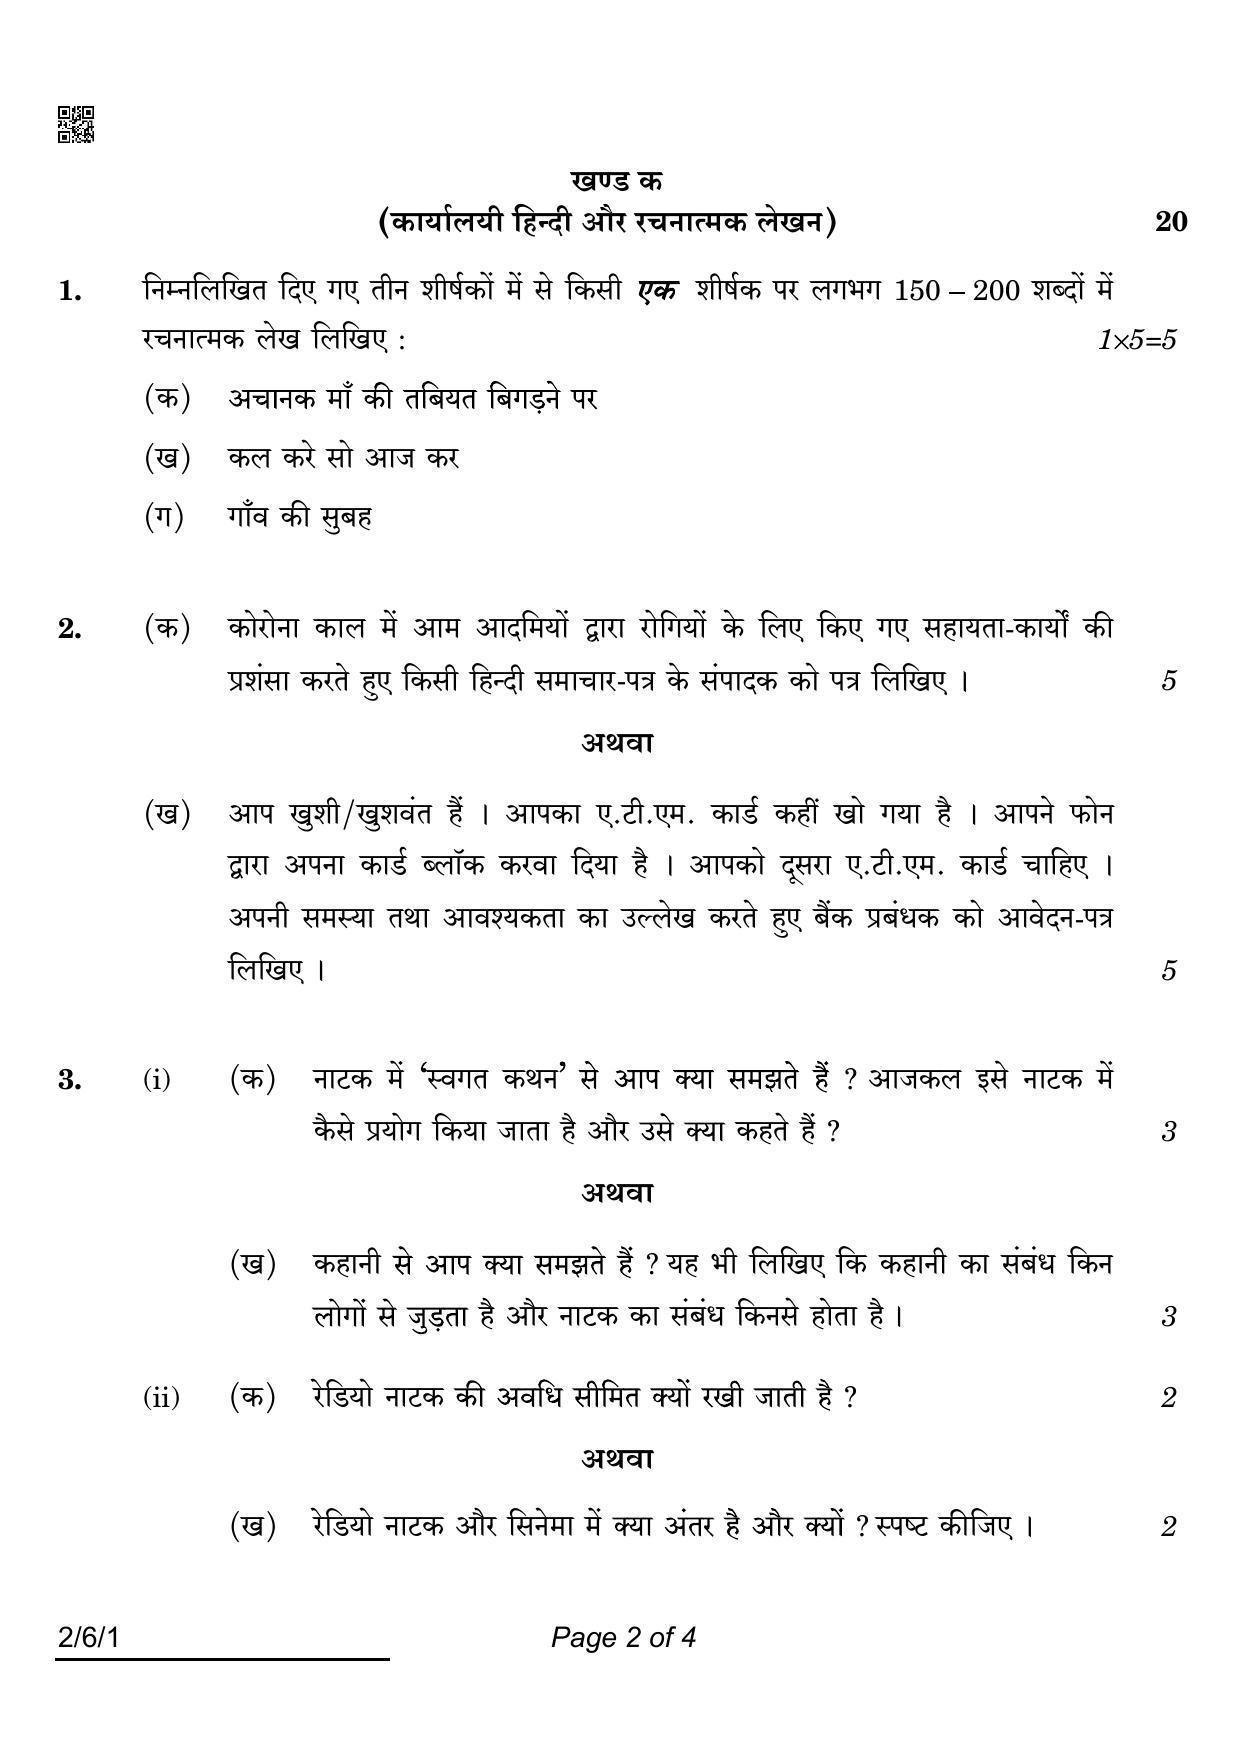 CBSE Class 12 2-6-1 Hindi Core 2022 Compartment Question Paper - Page 2